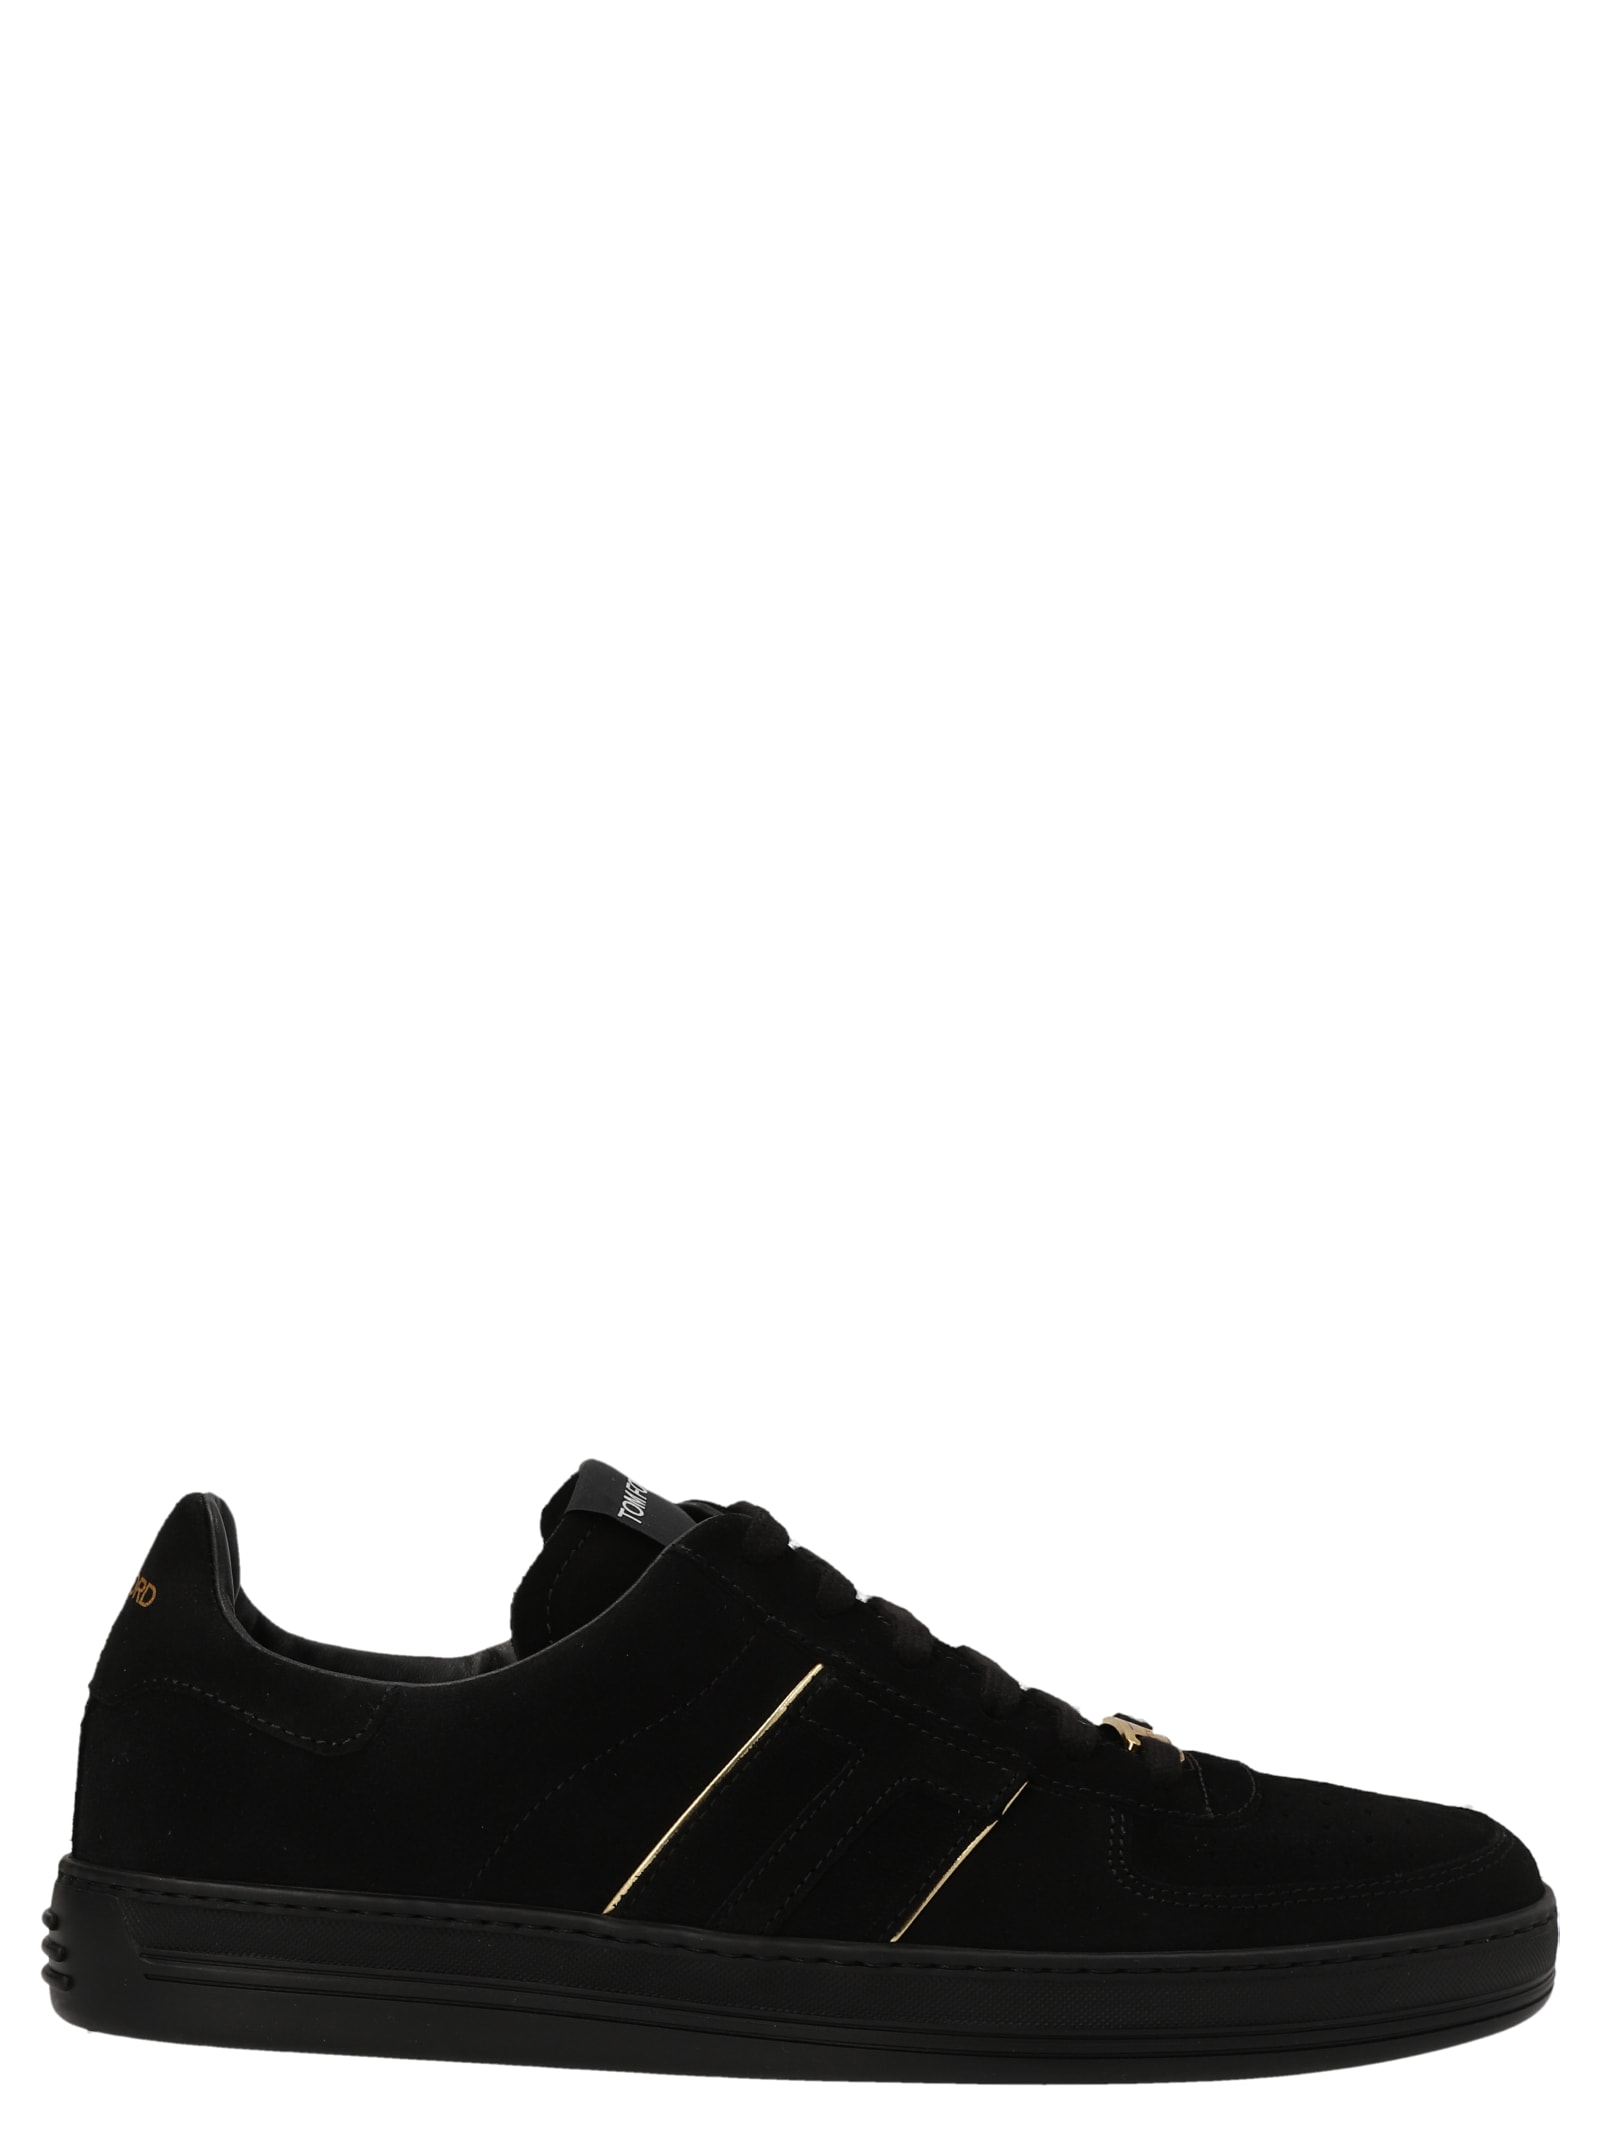 TOM FORD SUEDE LOGO SNEAKERS